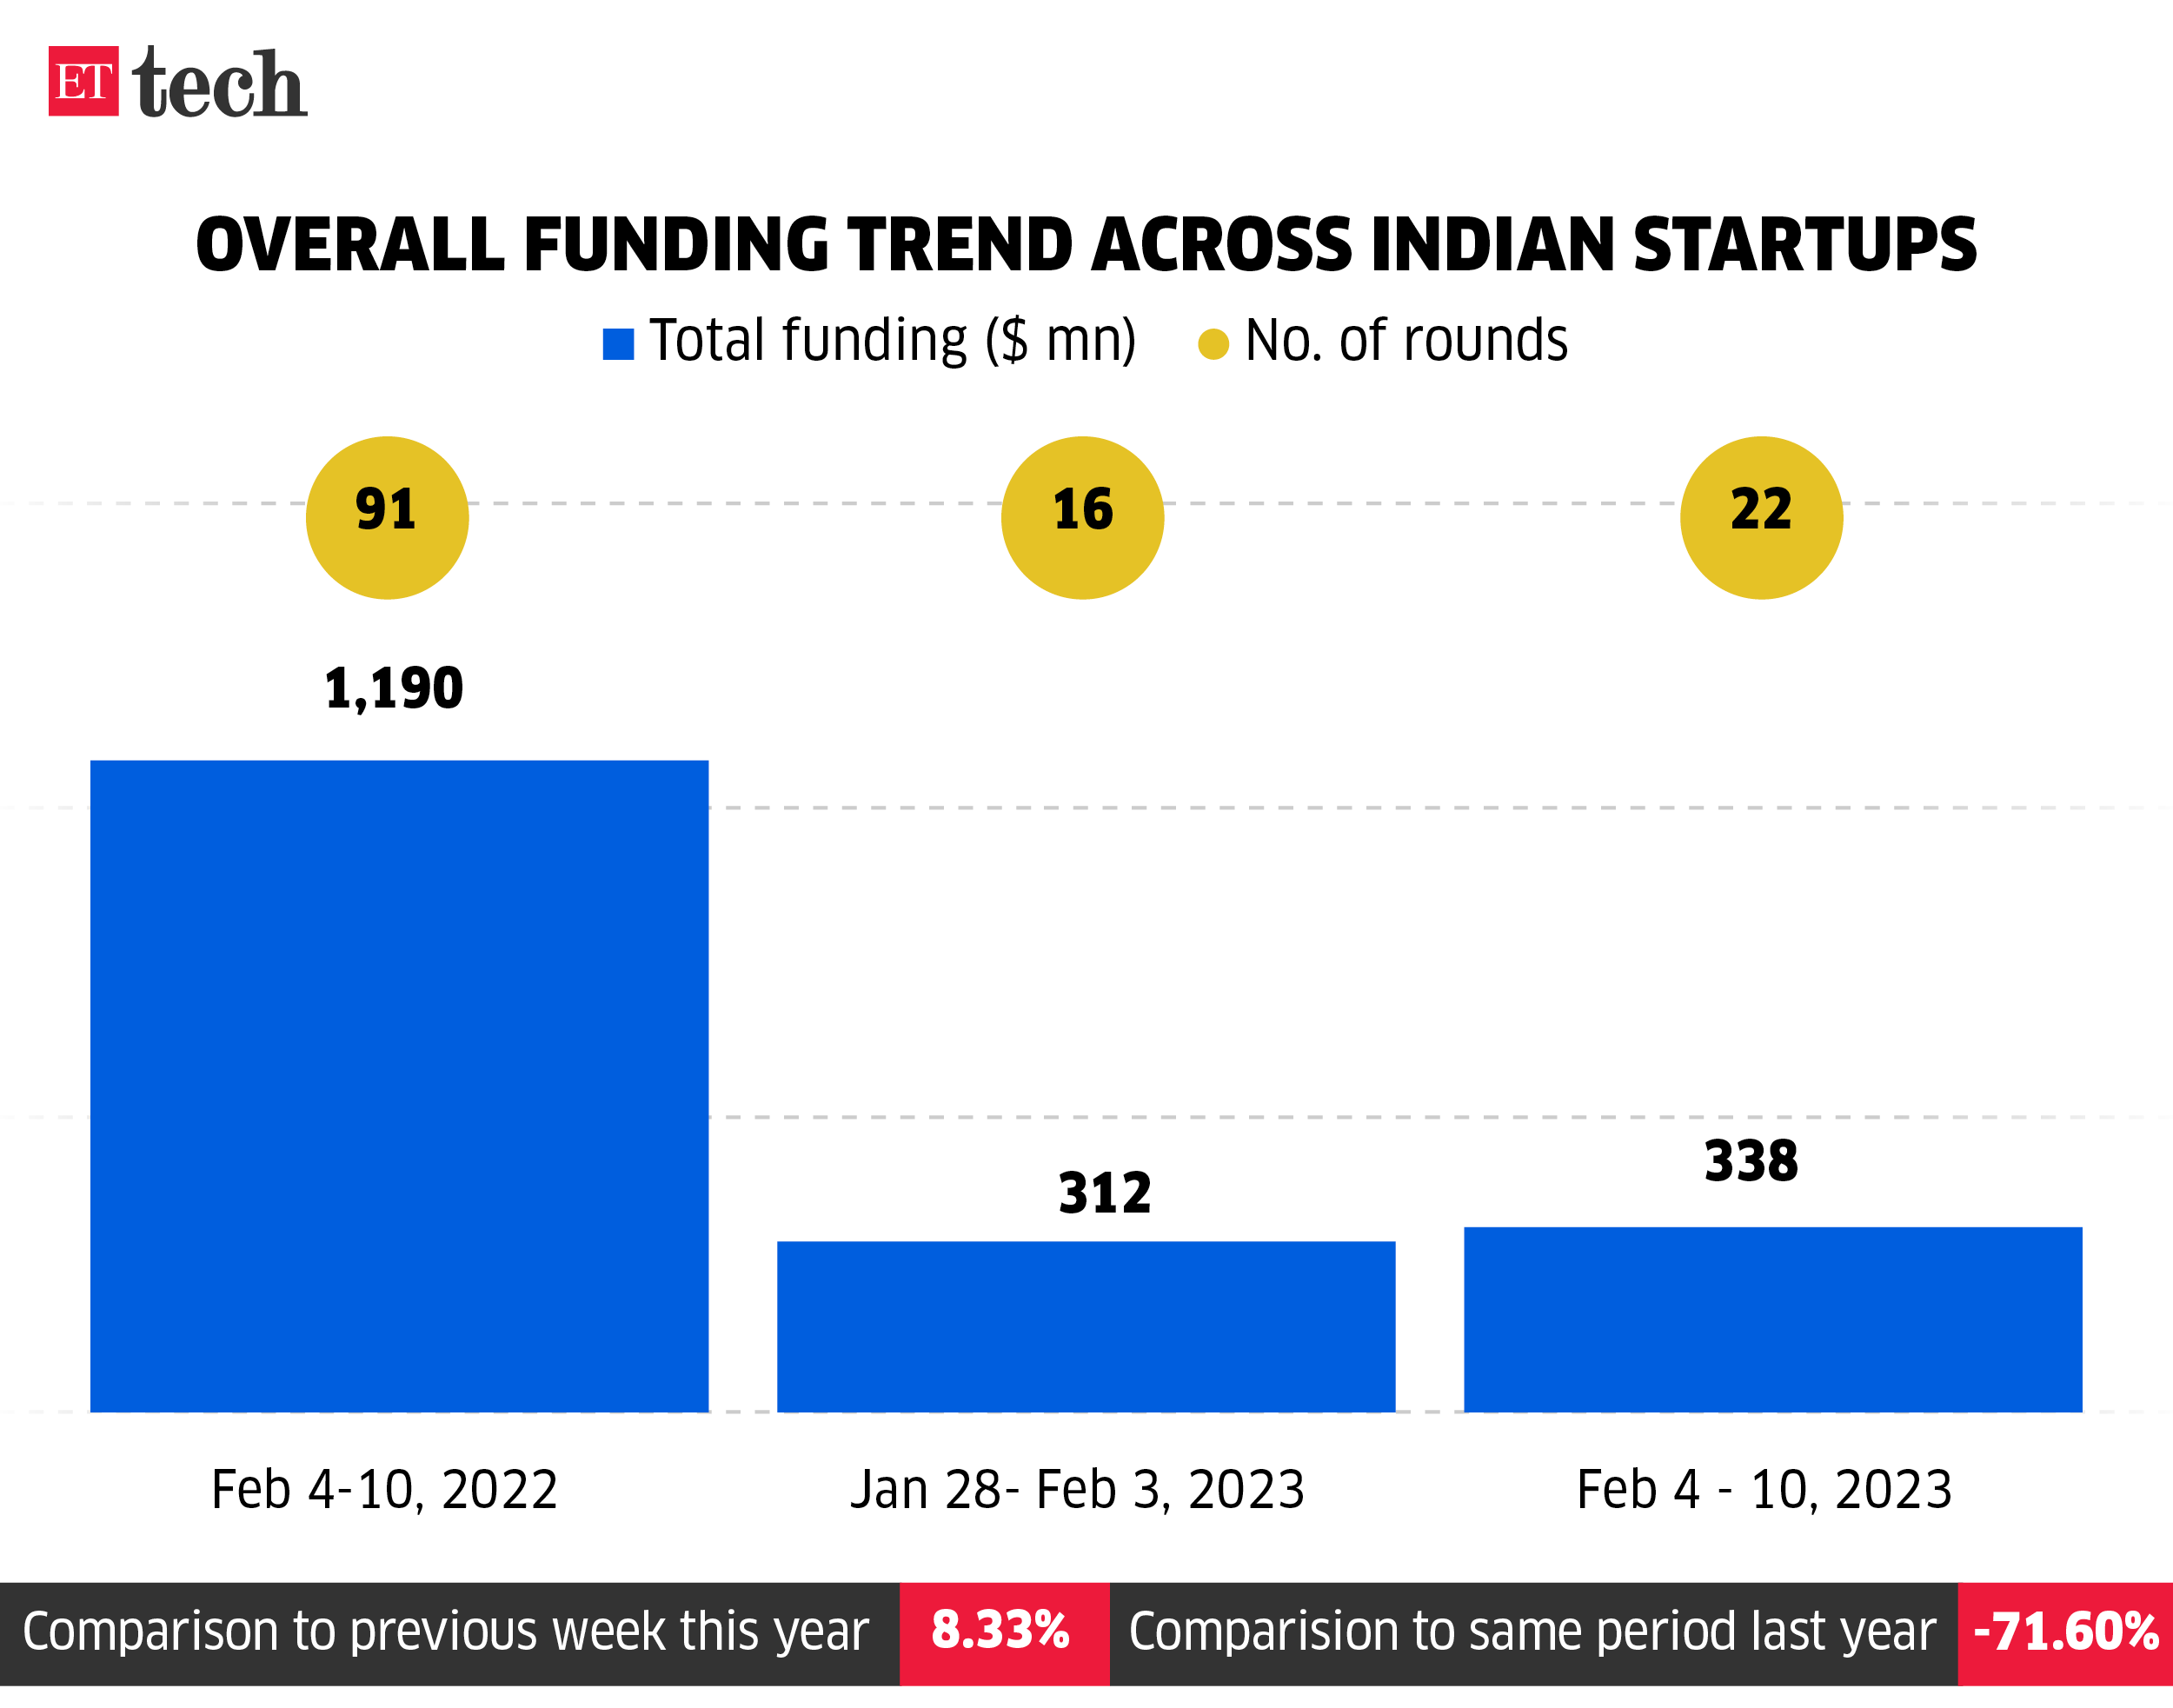 Overall funding trend across Indian startups